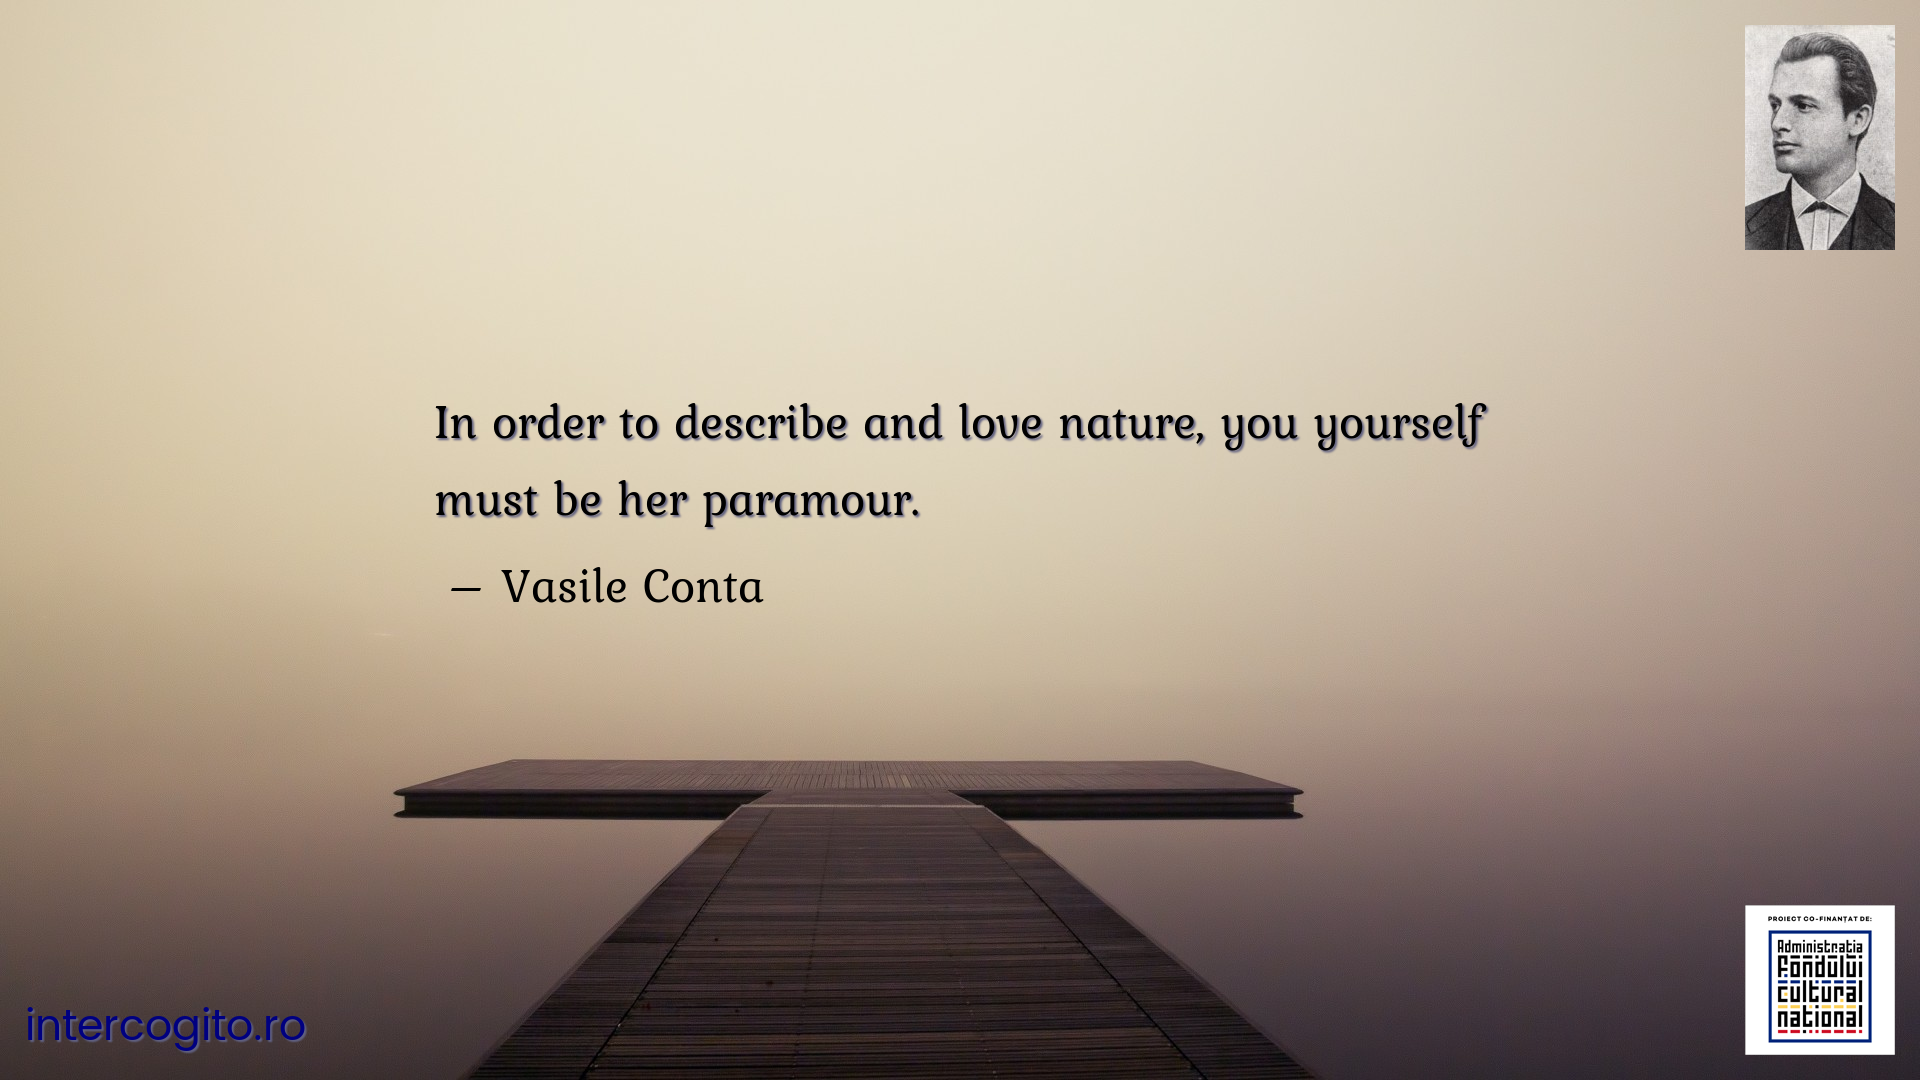 In order to describe and love nature, you yourself must be her paramour.